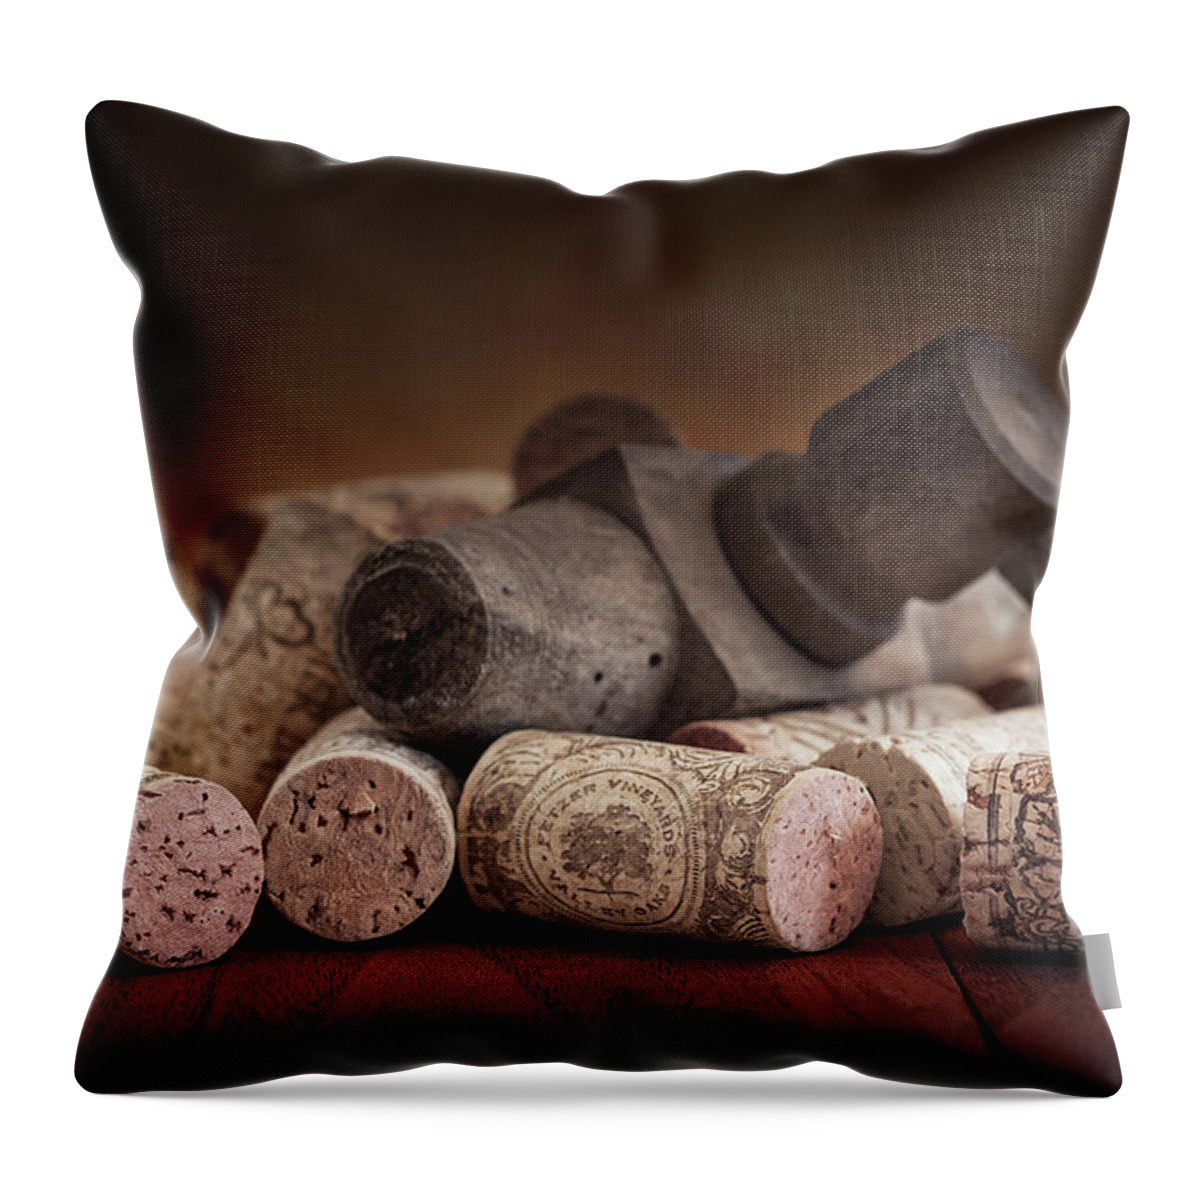 Aged Throw Pillow featuring the photograph Tapped Out - Wine Tap with Corks by Tom Mc Nemar